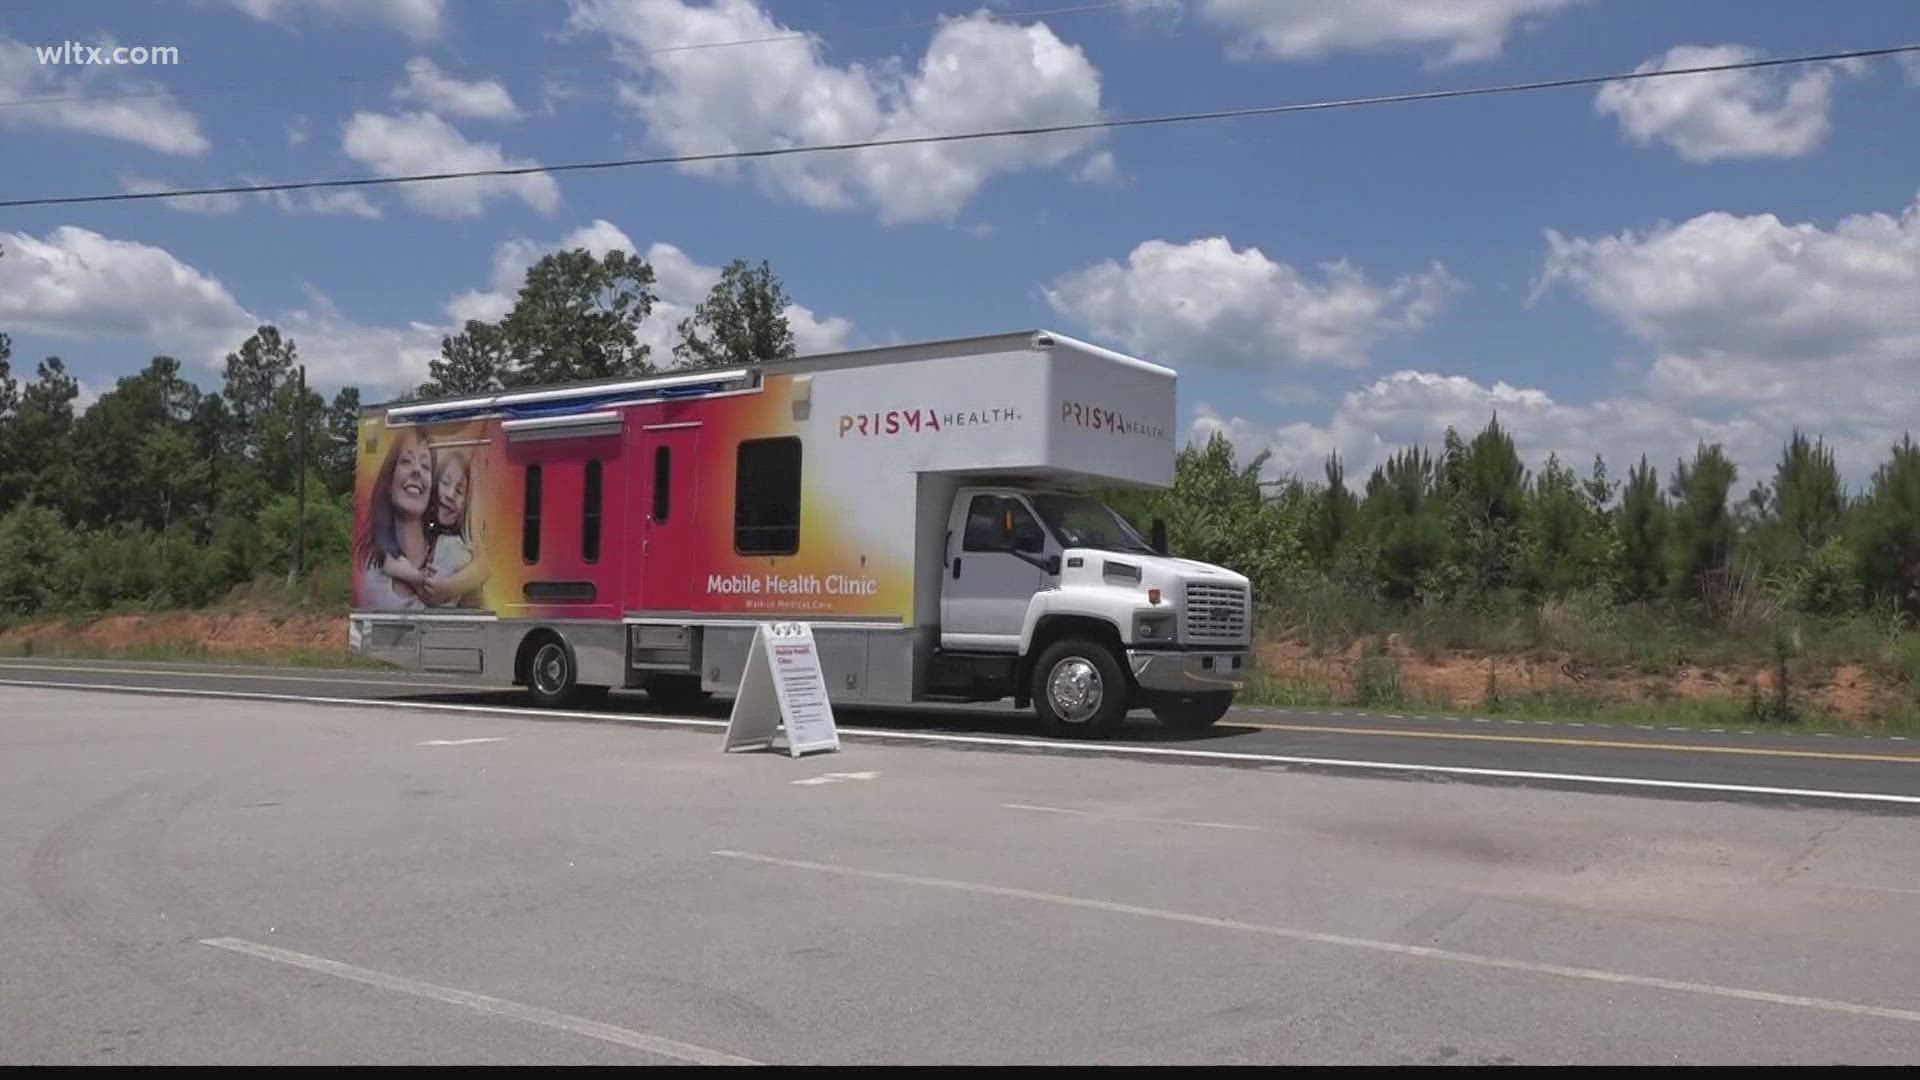 A Prisma Health mobile care clinic is making its way through rural parts of the Midlands during the weekends.